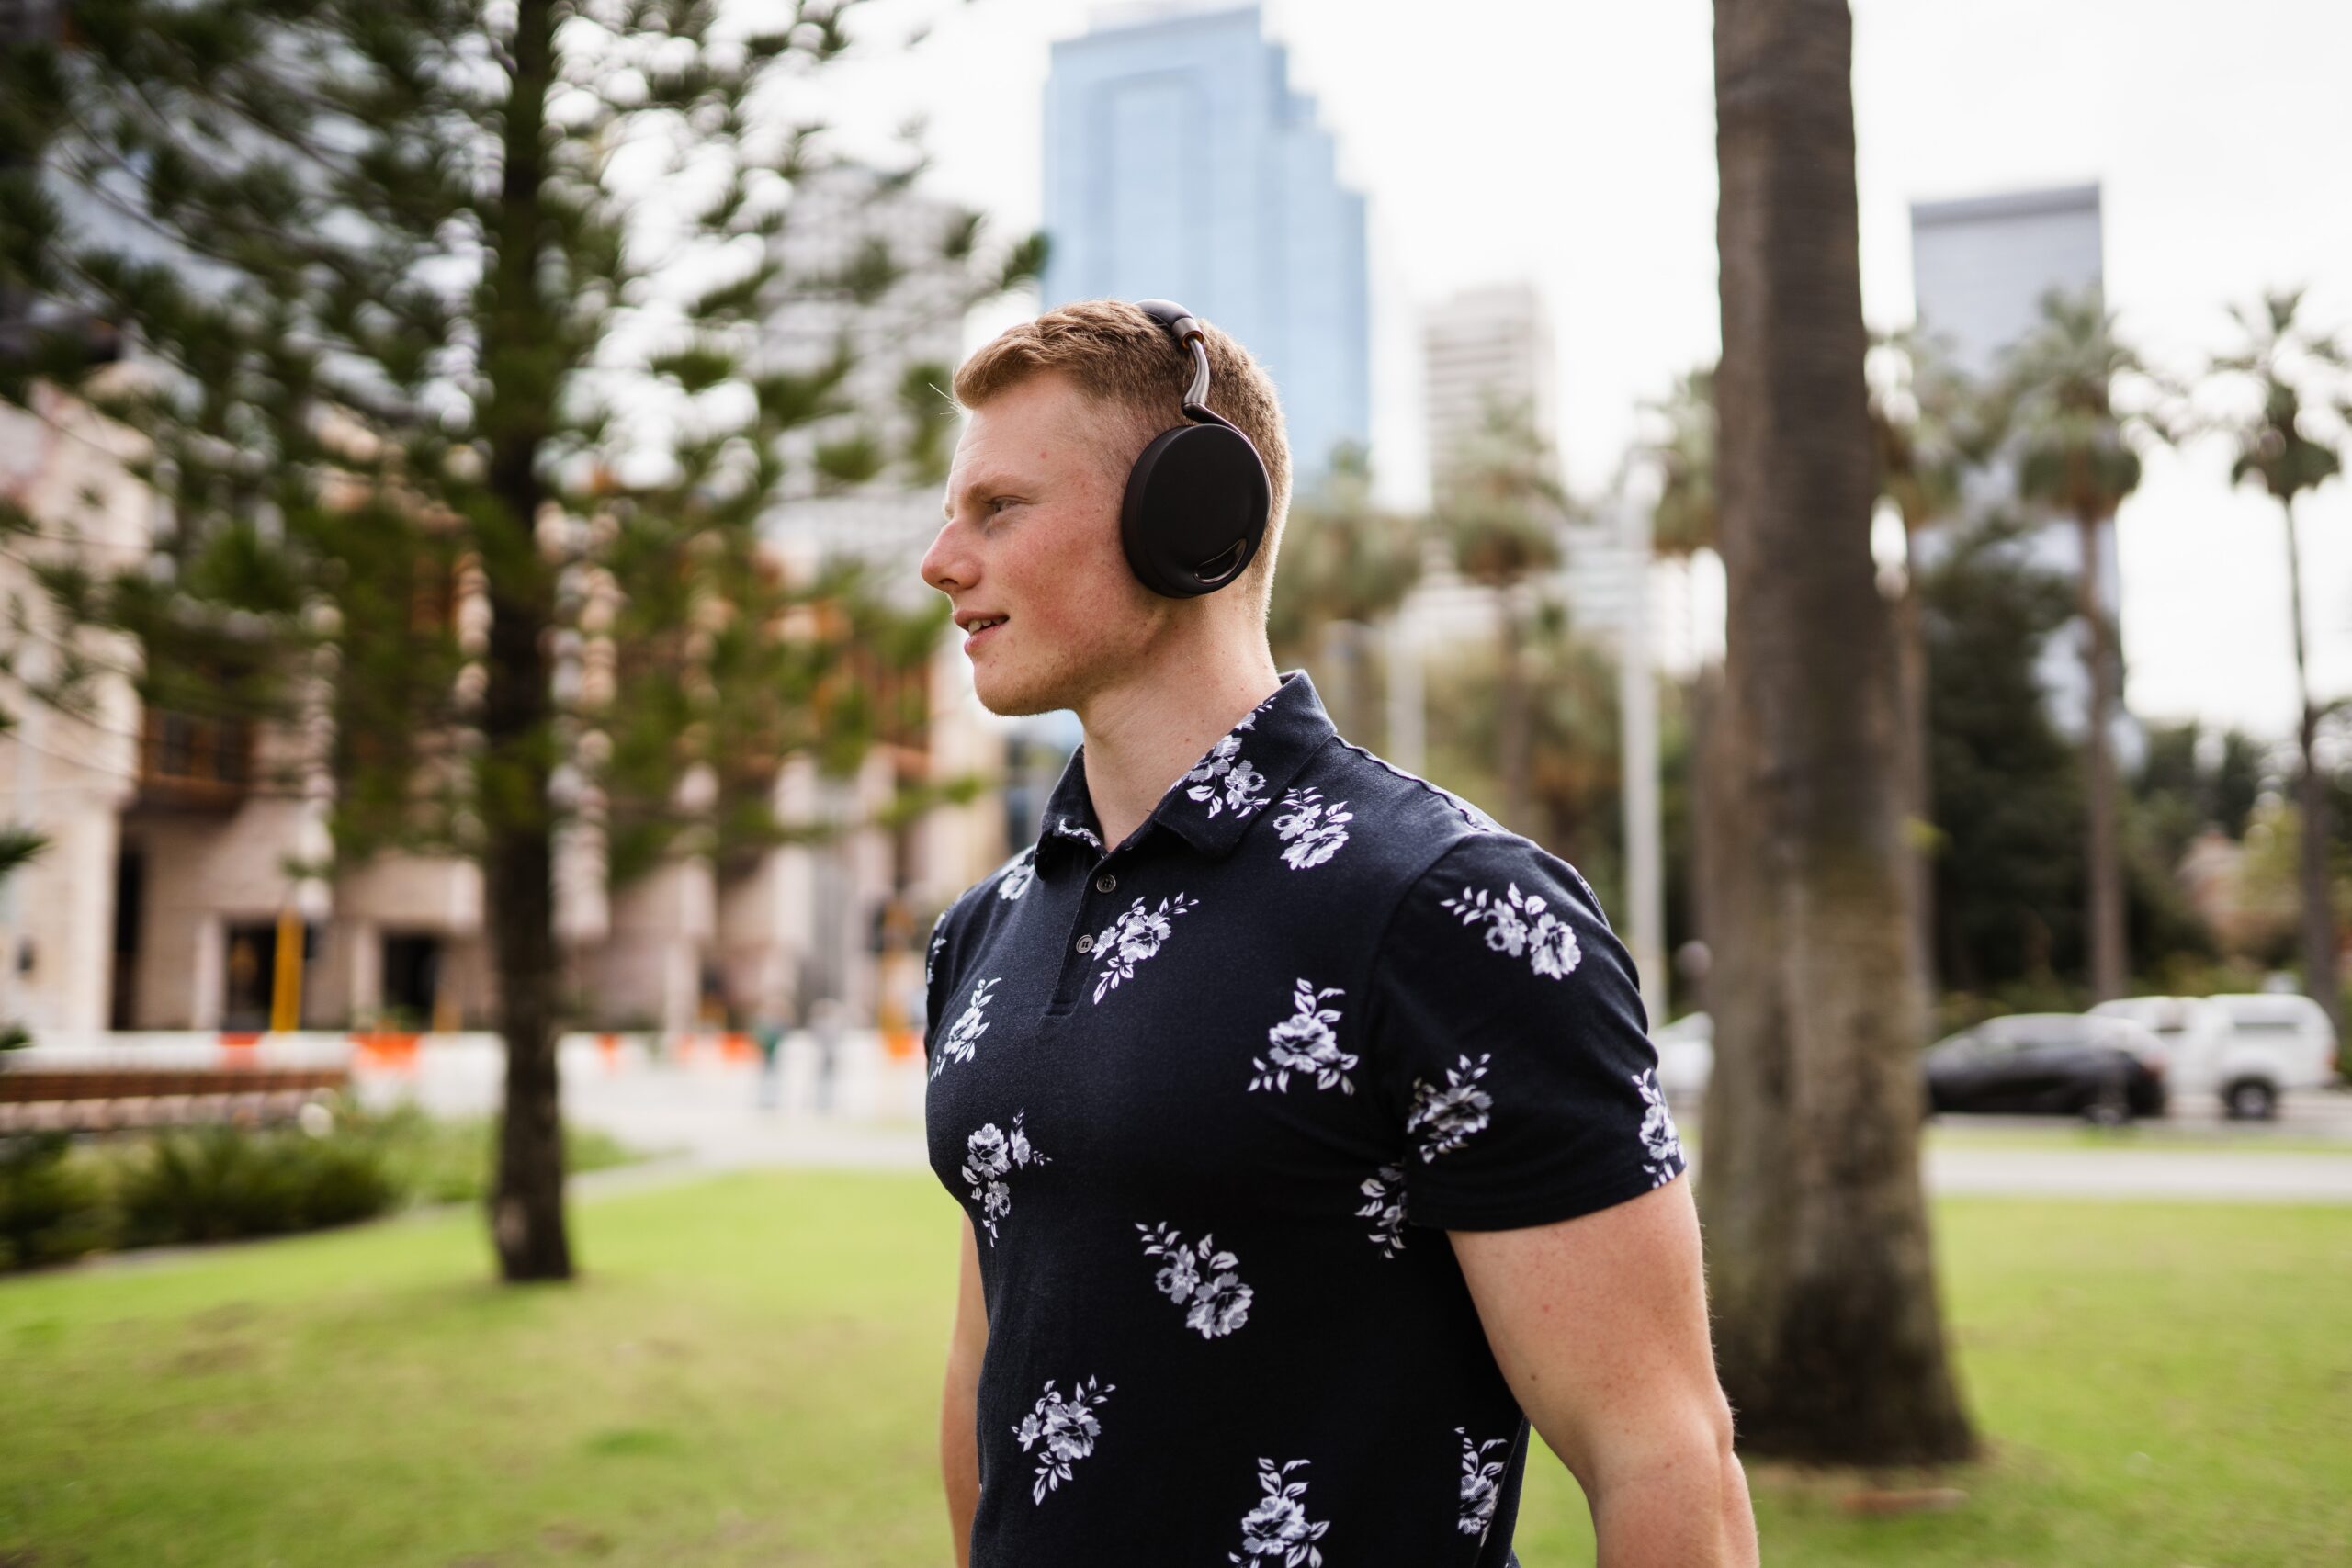 A man in his 20s, smiling, walks through Melbourne wearing large headphones